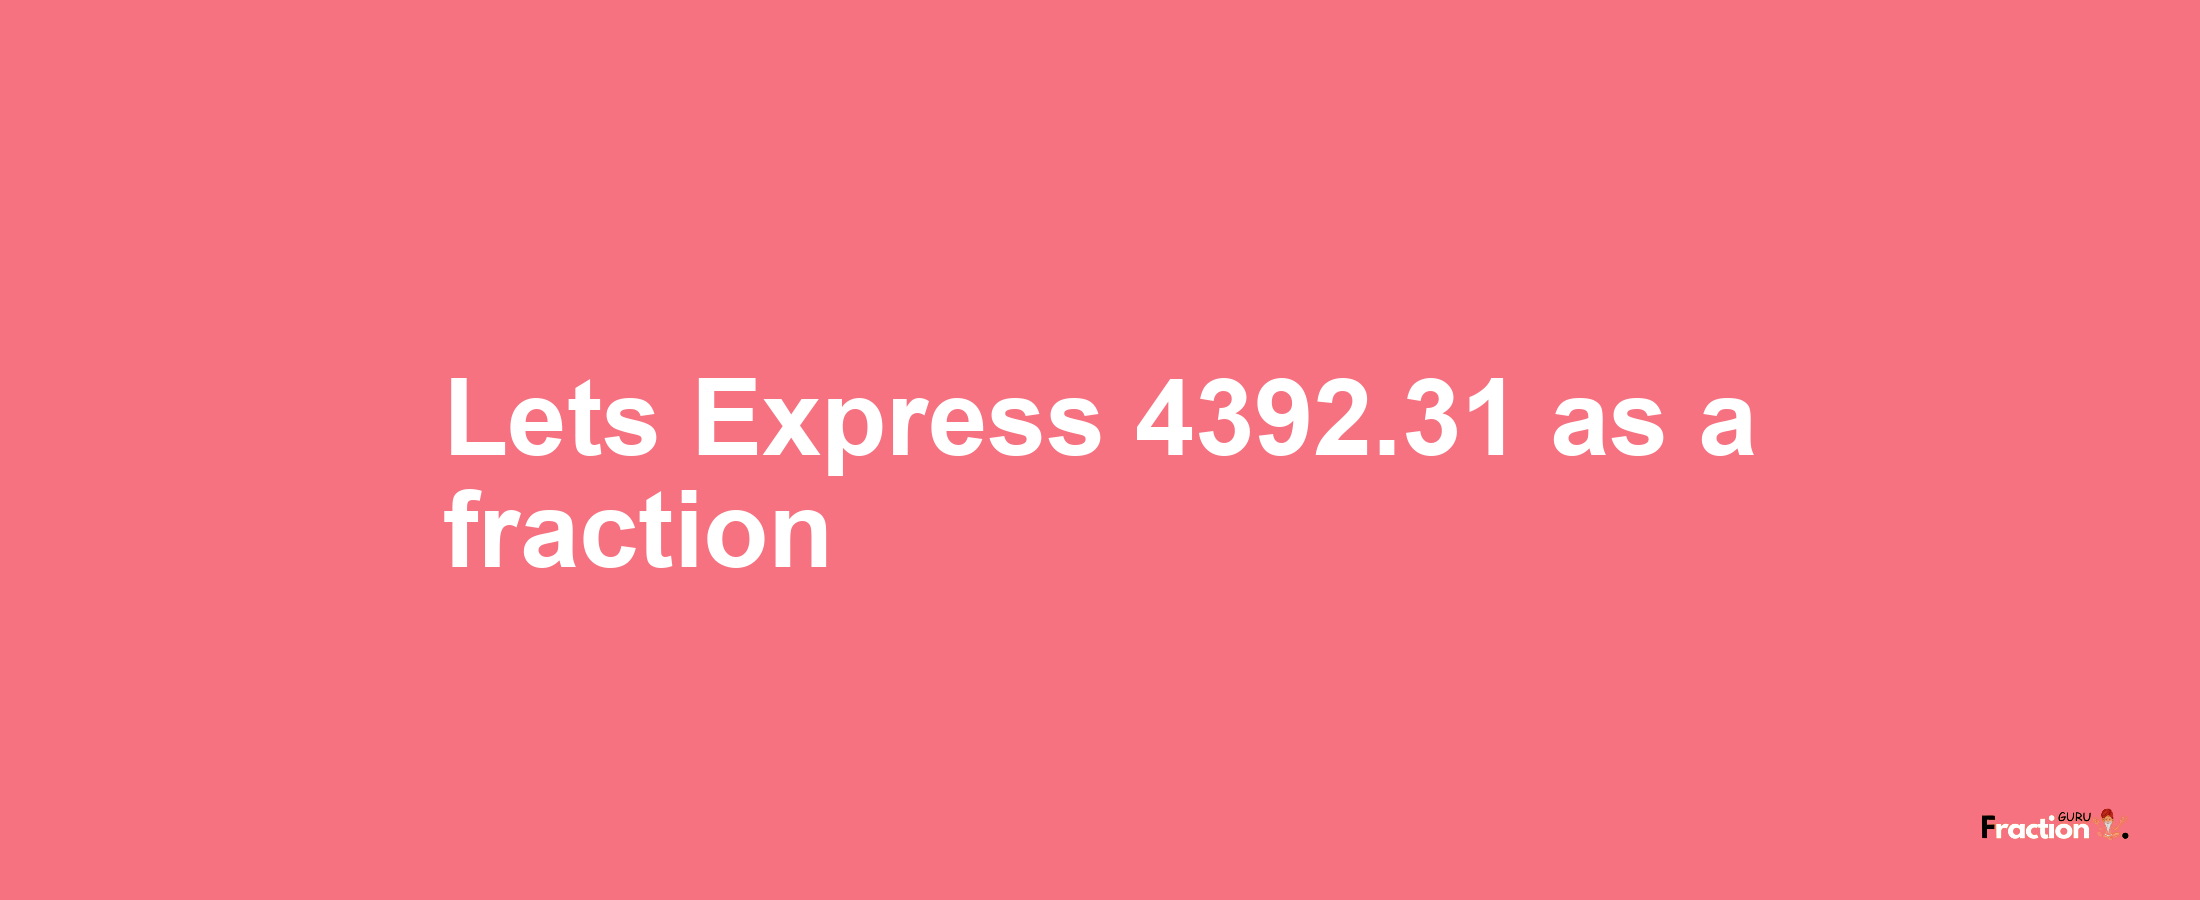 Lets Express 4392.31 as afraction